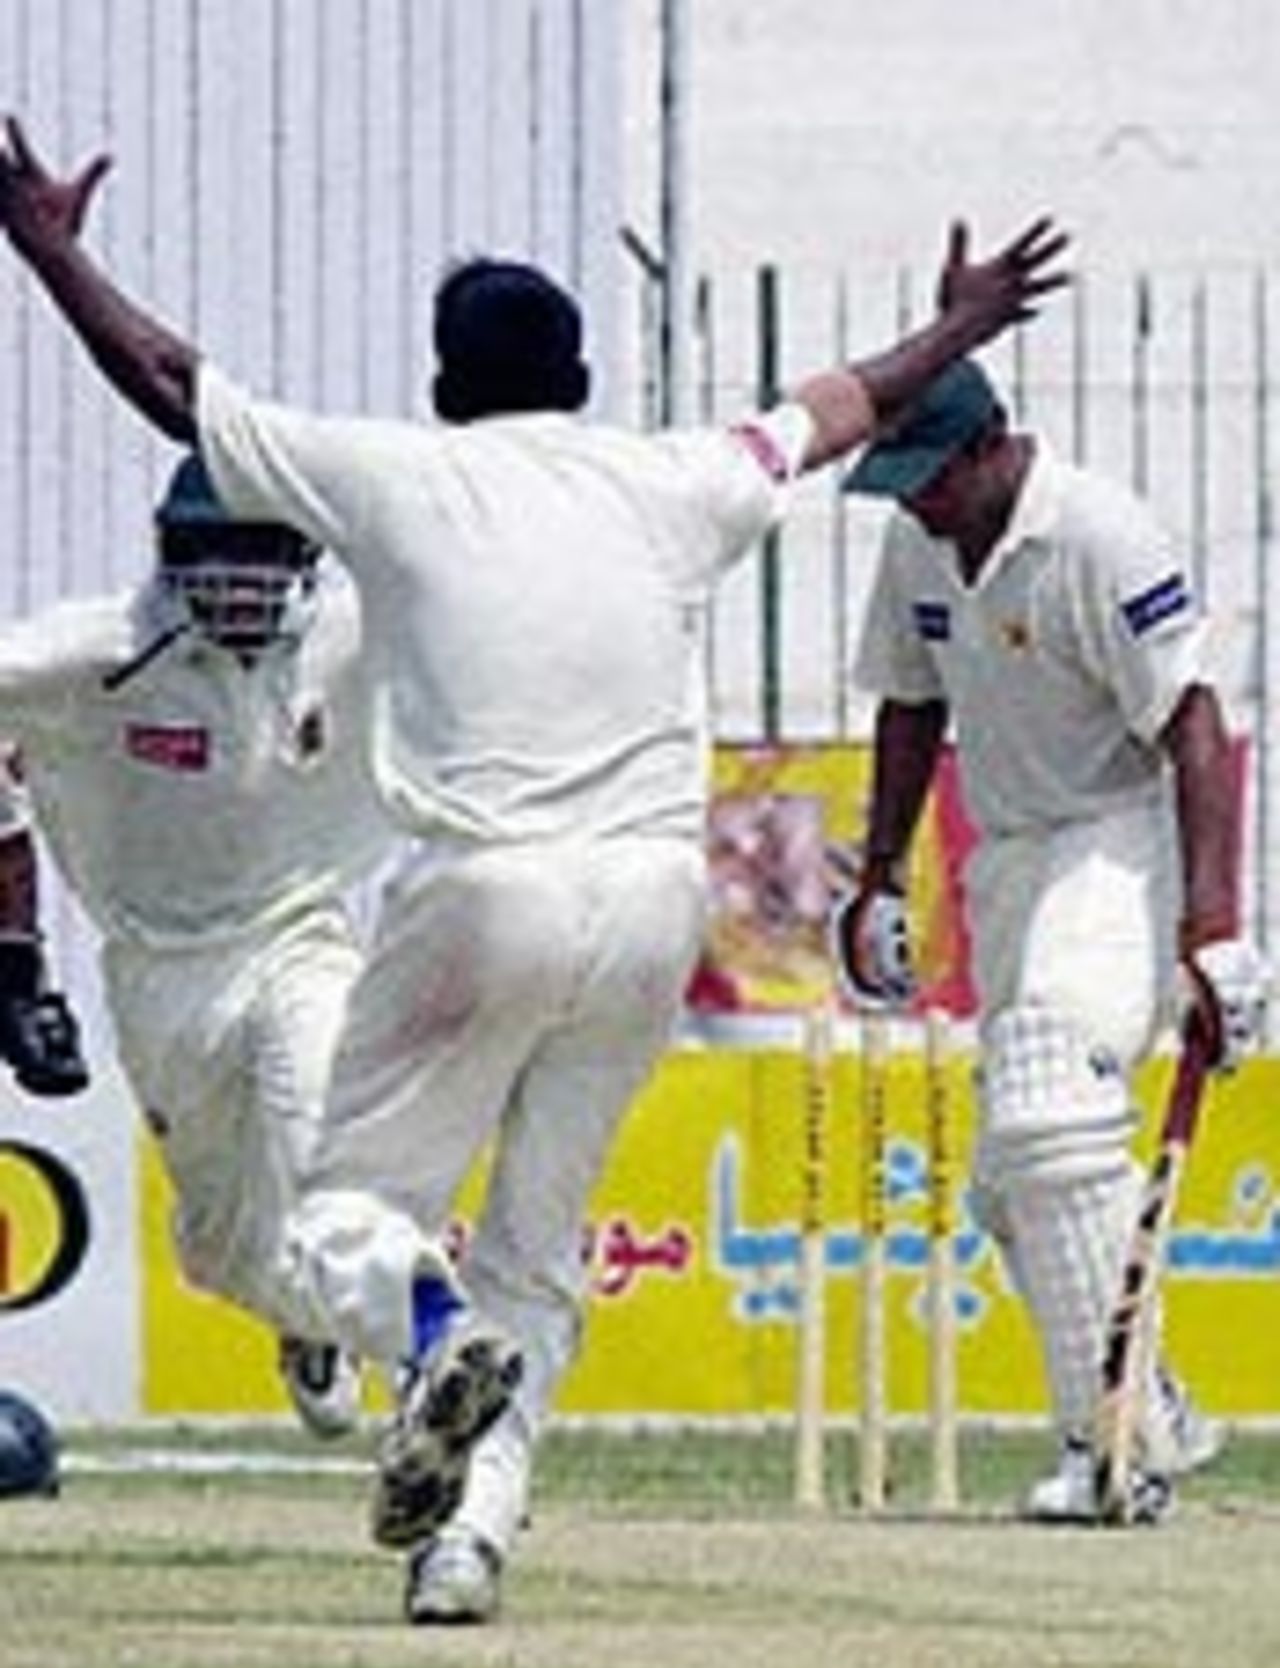 Mohammad Rafique celebrates after dismissing Inzamam-ul-Haq on the third day of the Peshawar Test